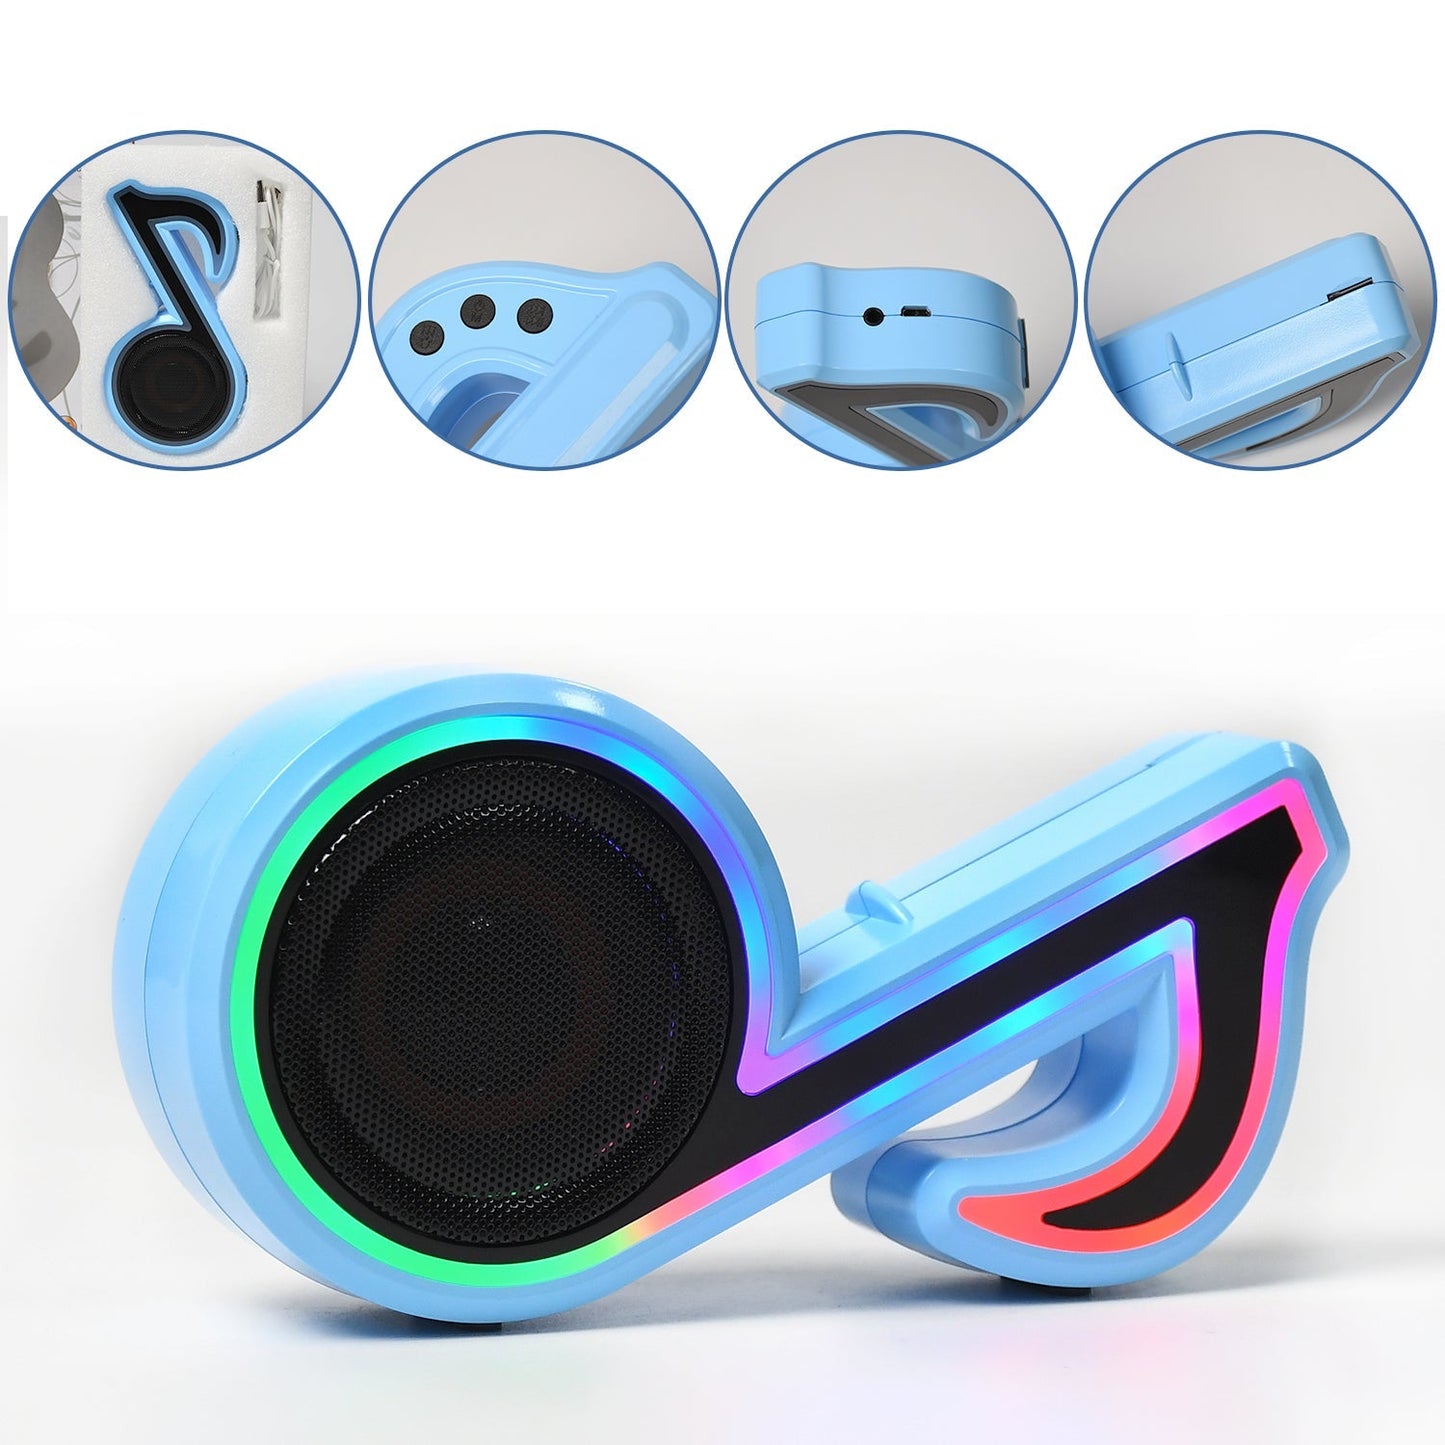 6068 Mini Portable Music Note Shape Speaker Subwoofer Colorful Musical Note LED Lighting Sound For Creatives Gift Computer Phone Sound Equipment blootuth speaker (Media Player)